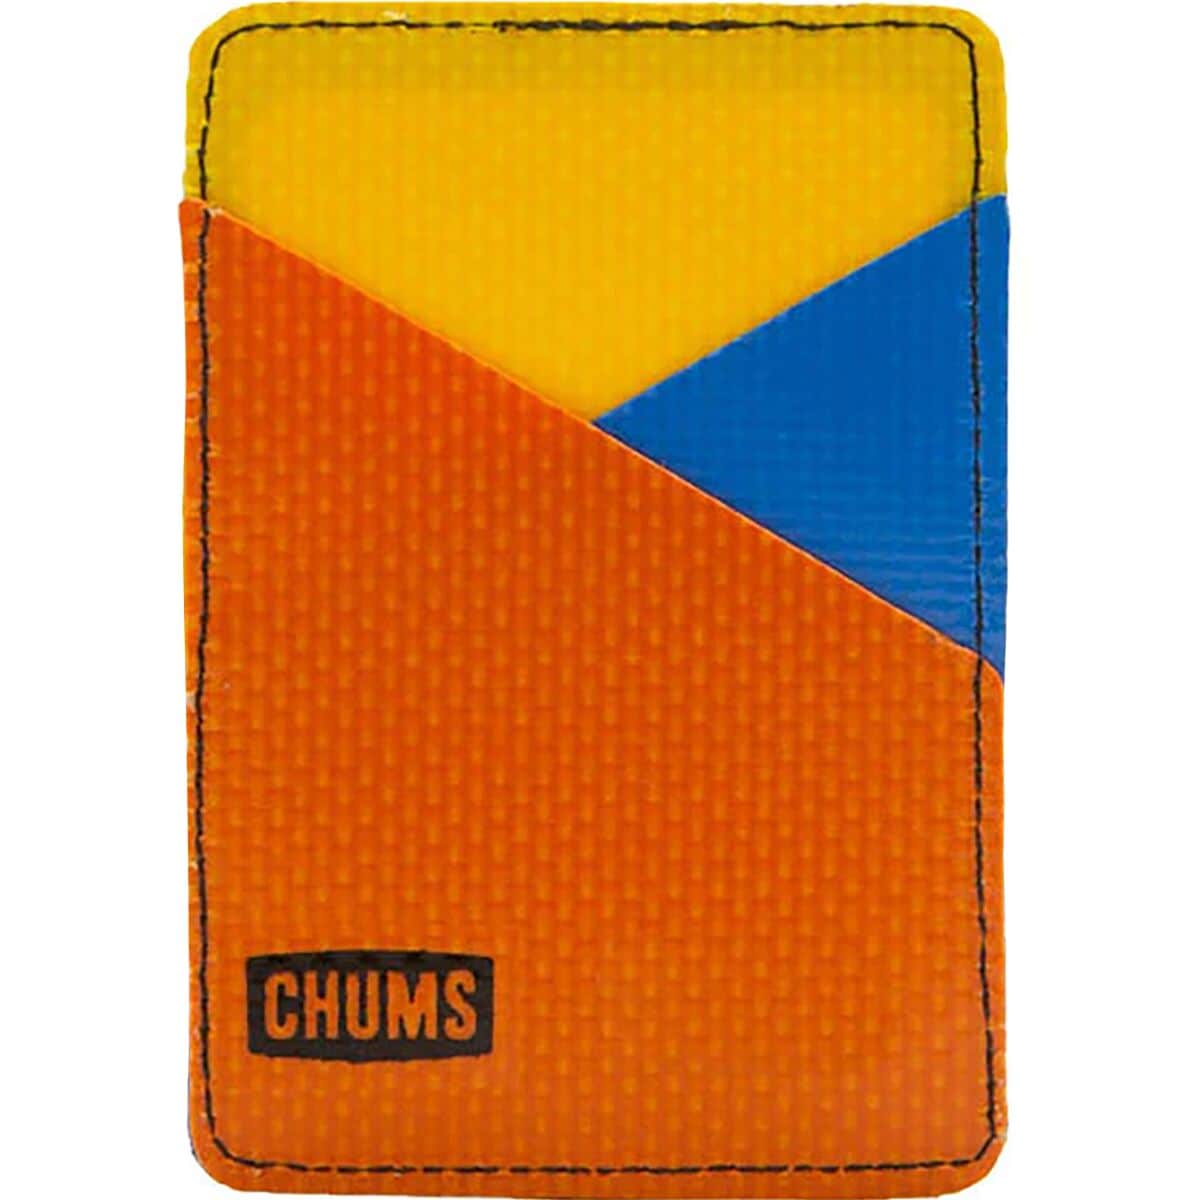 Chums Duckie Wallet